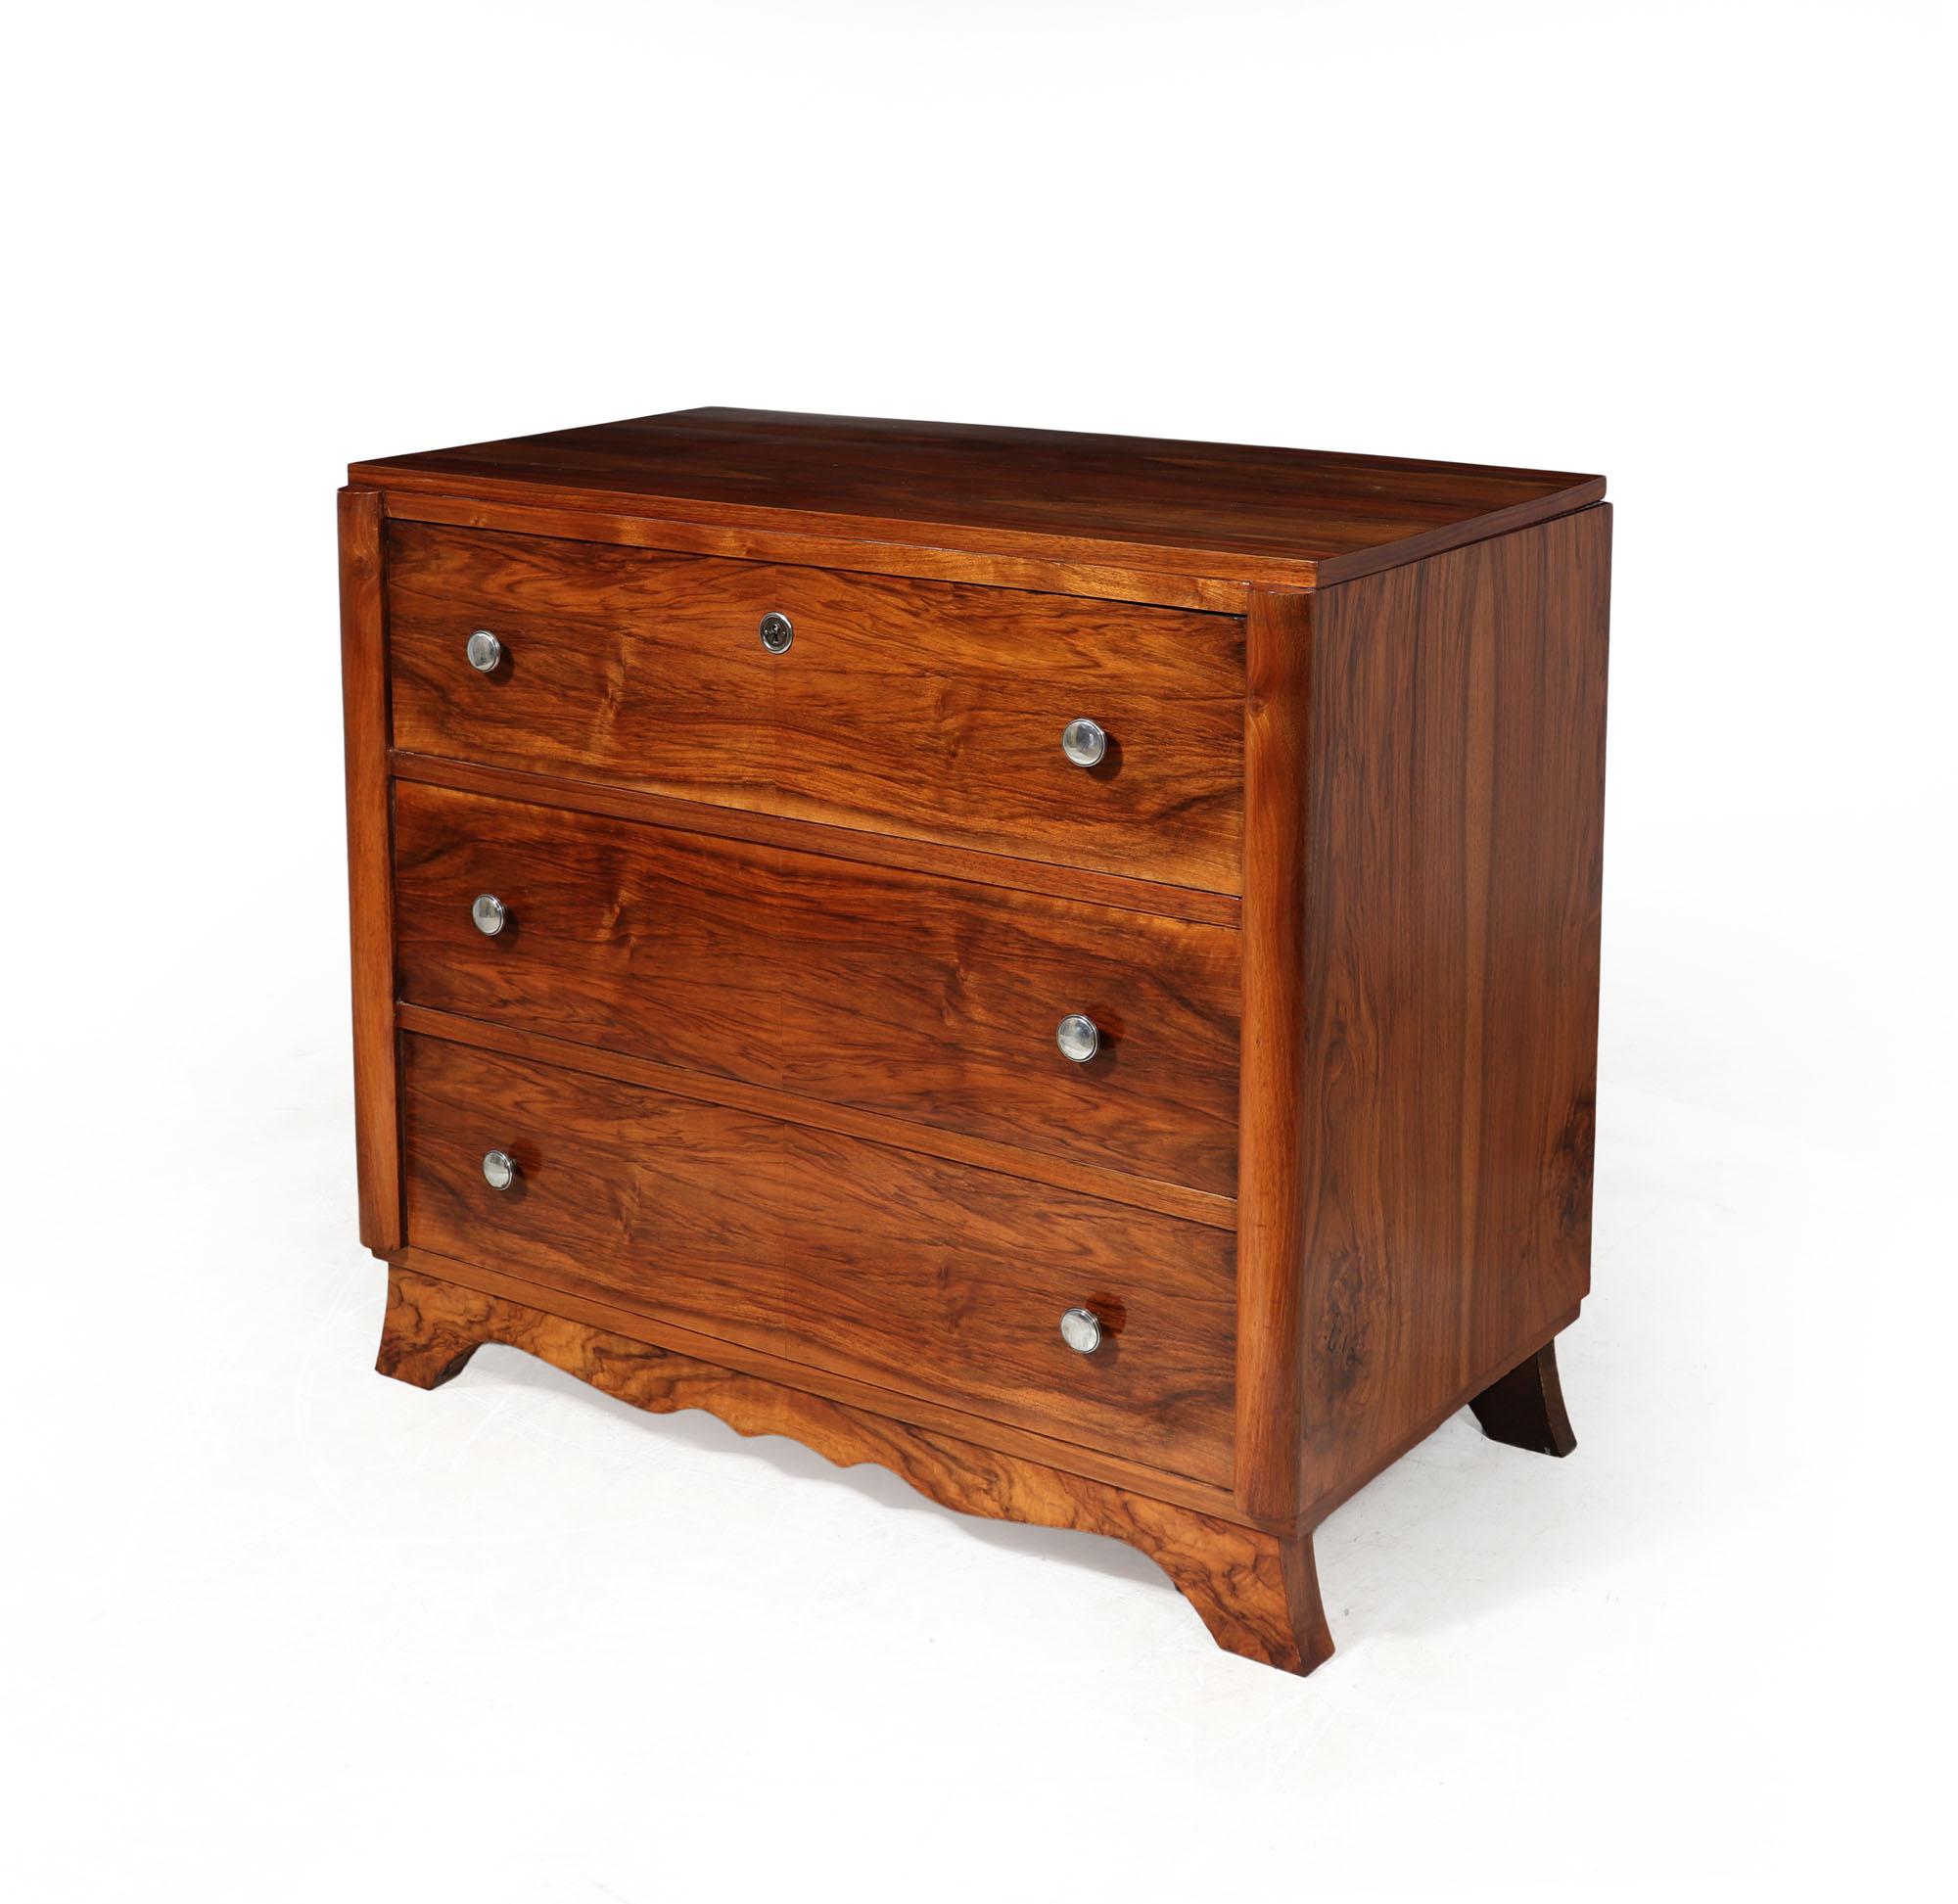  ART DECO WALNUT CHEST OF DRAWERS
Transport yourself to the 1930s with this stunning French Art Deco walnut chest of drawers. Its elegant design and metal handles exude sophistication, while its Three spacious drawers offer both style and